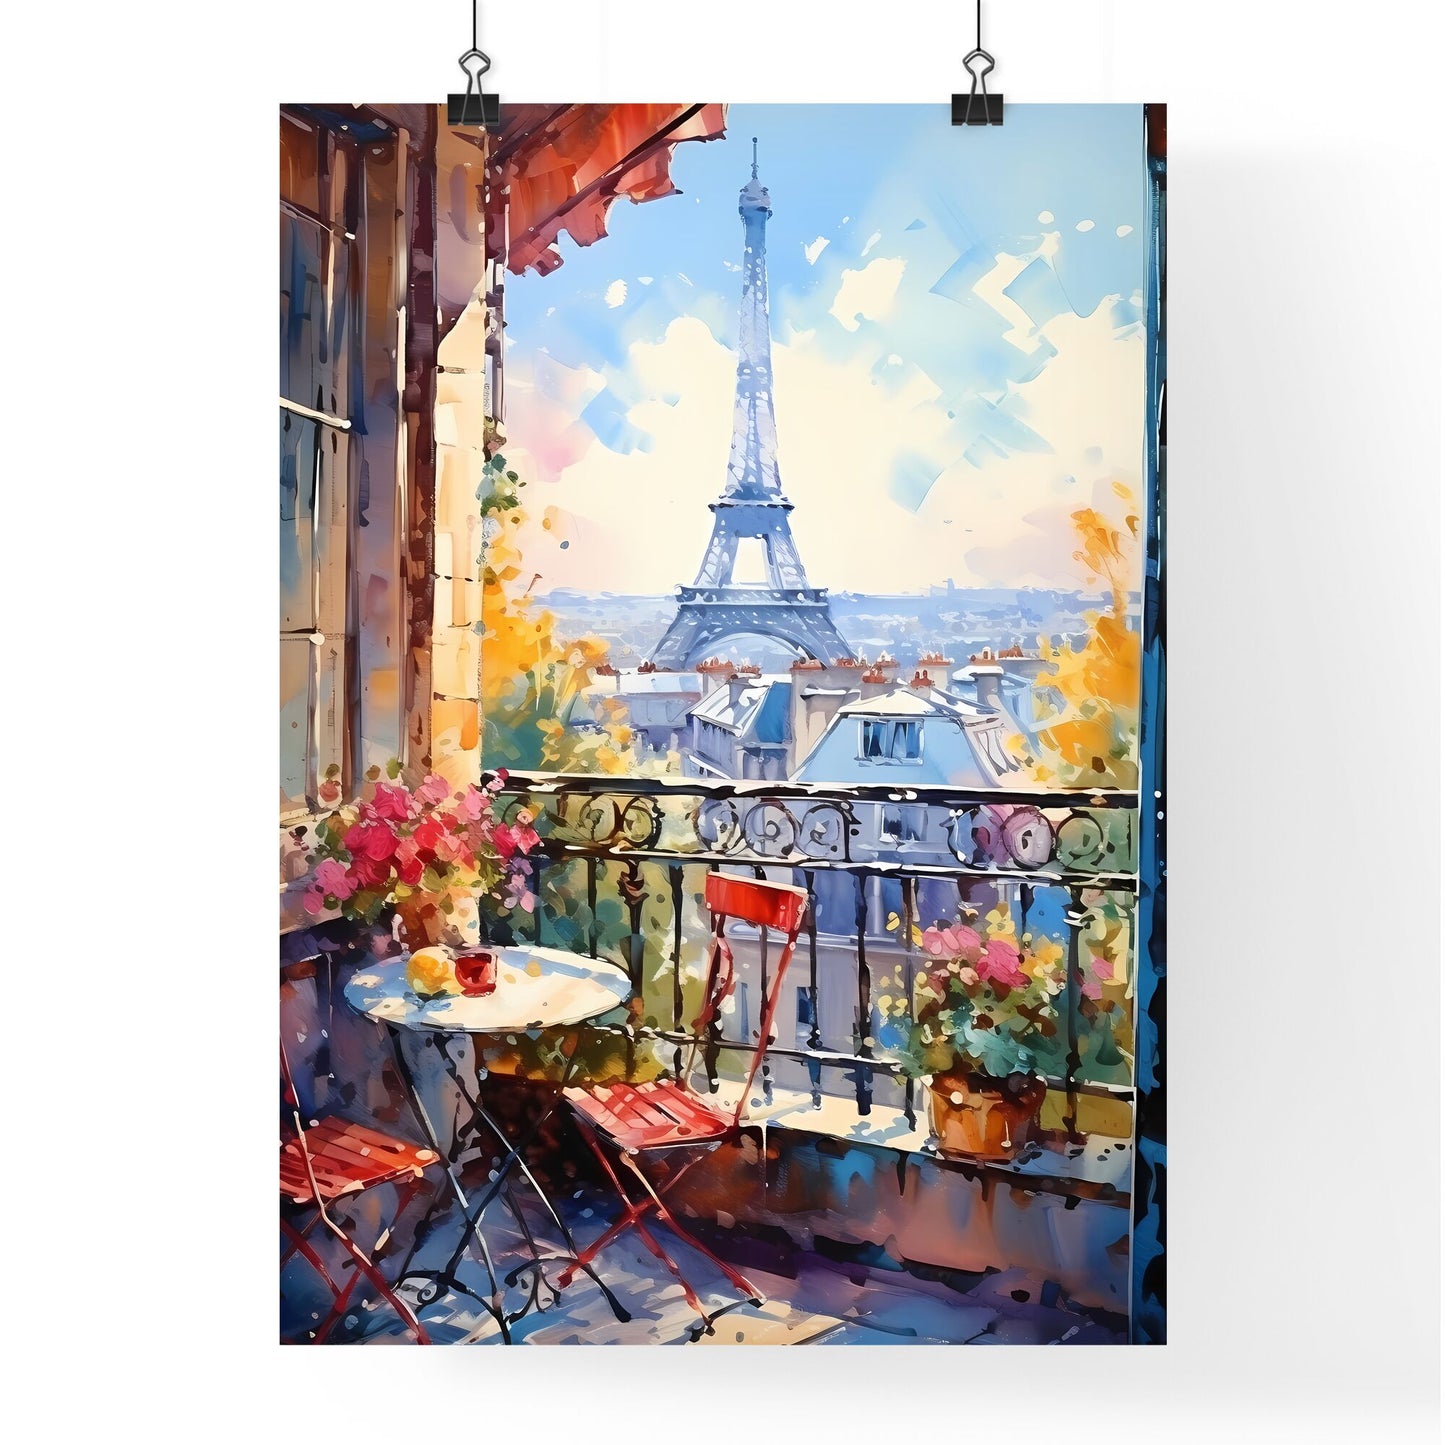 Watercolor Painting Of A Balcony With A Tower In The Background Art Print Default Title